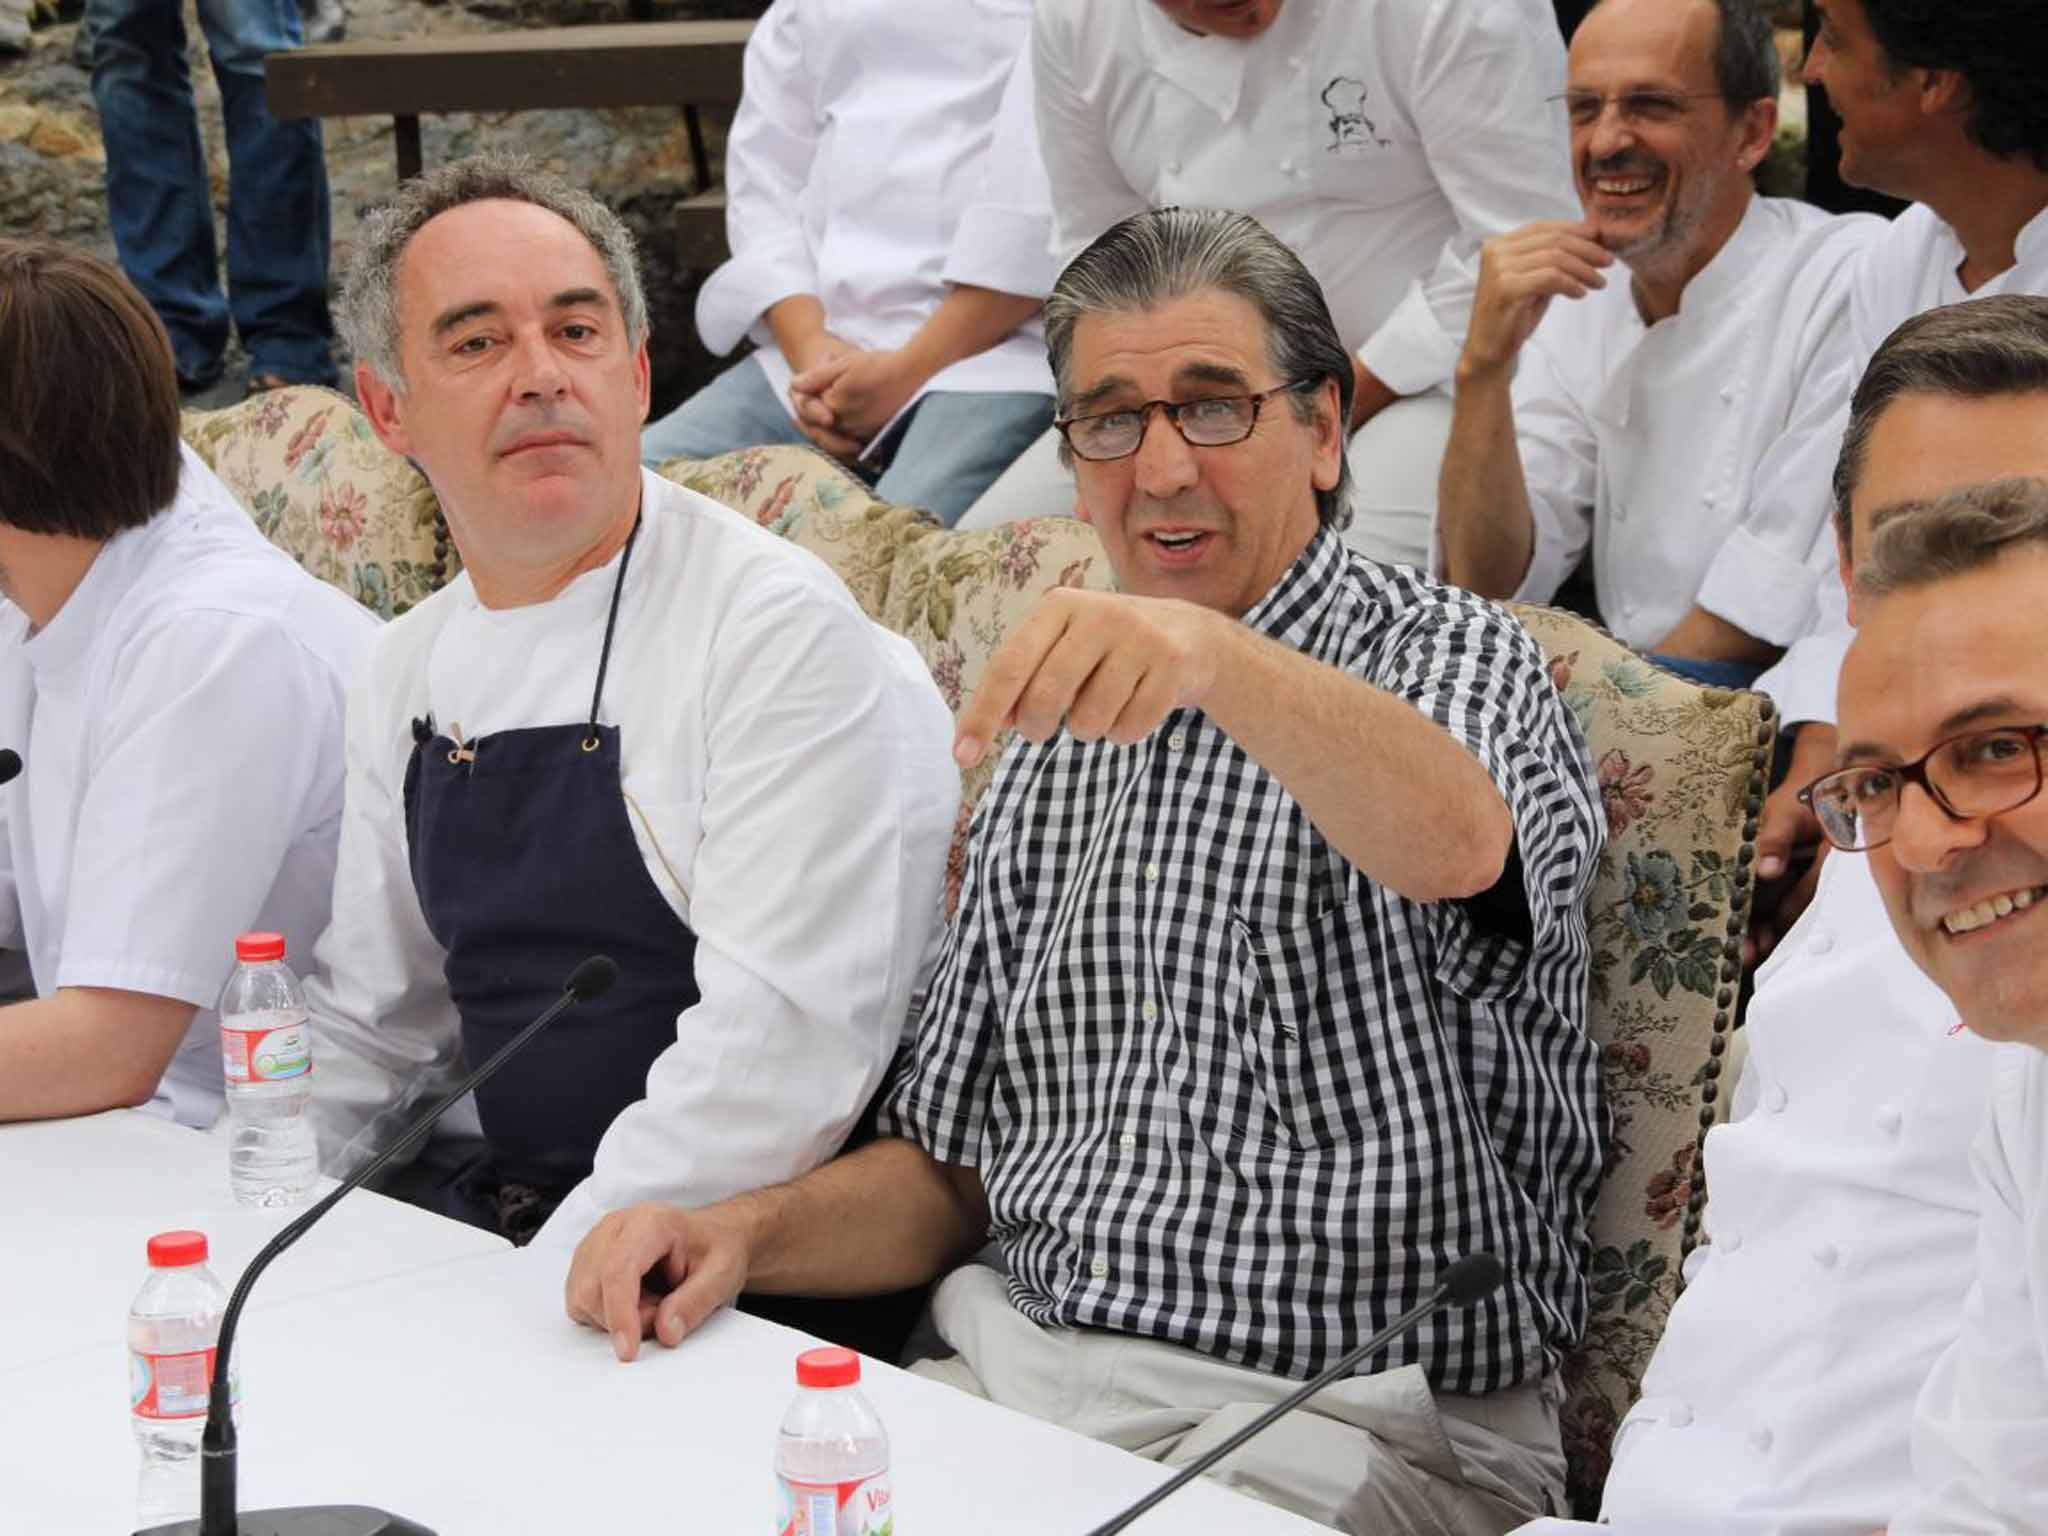 Soler, in check shirt, with his chefs: El Bulli had 42 of them